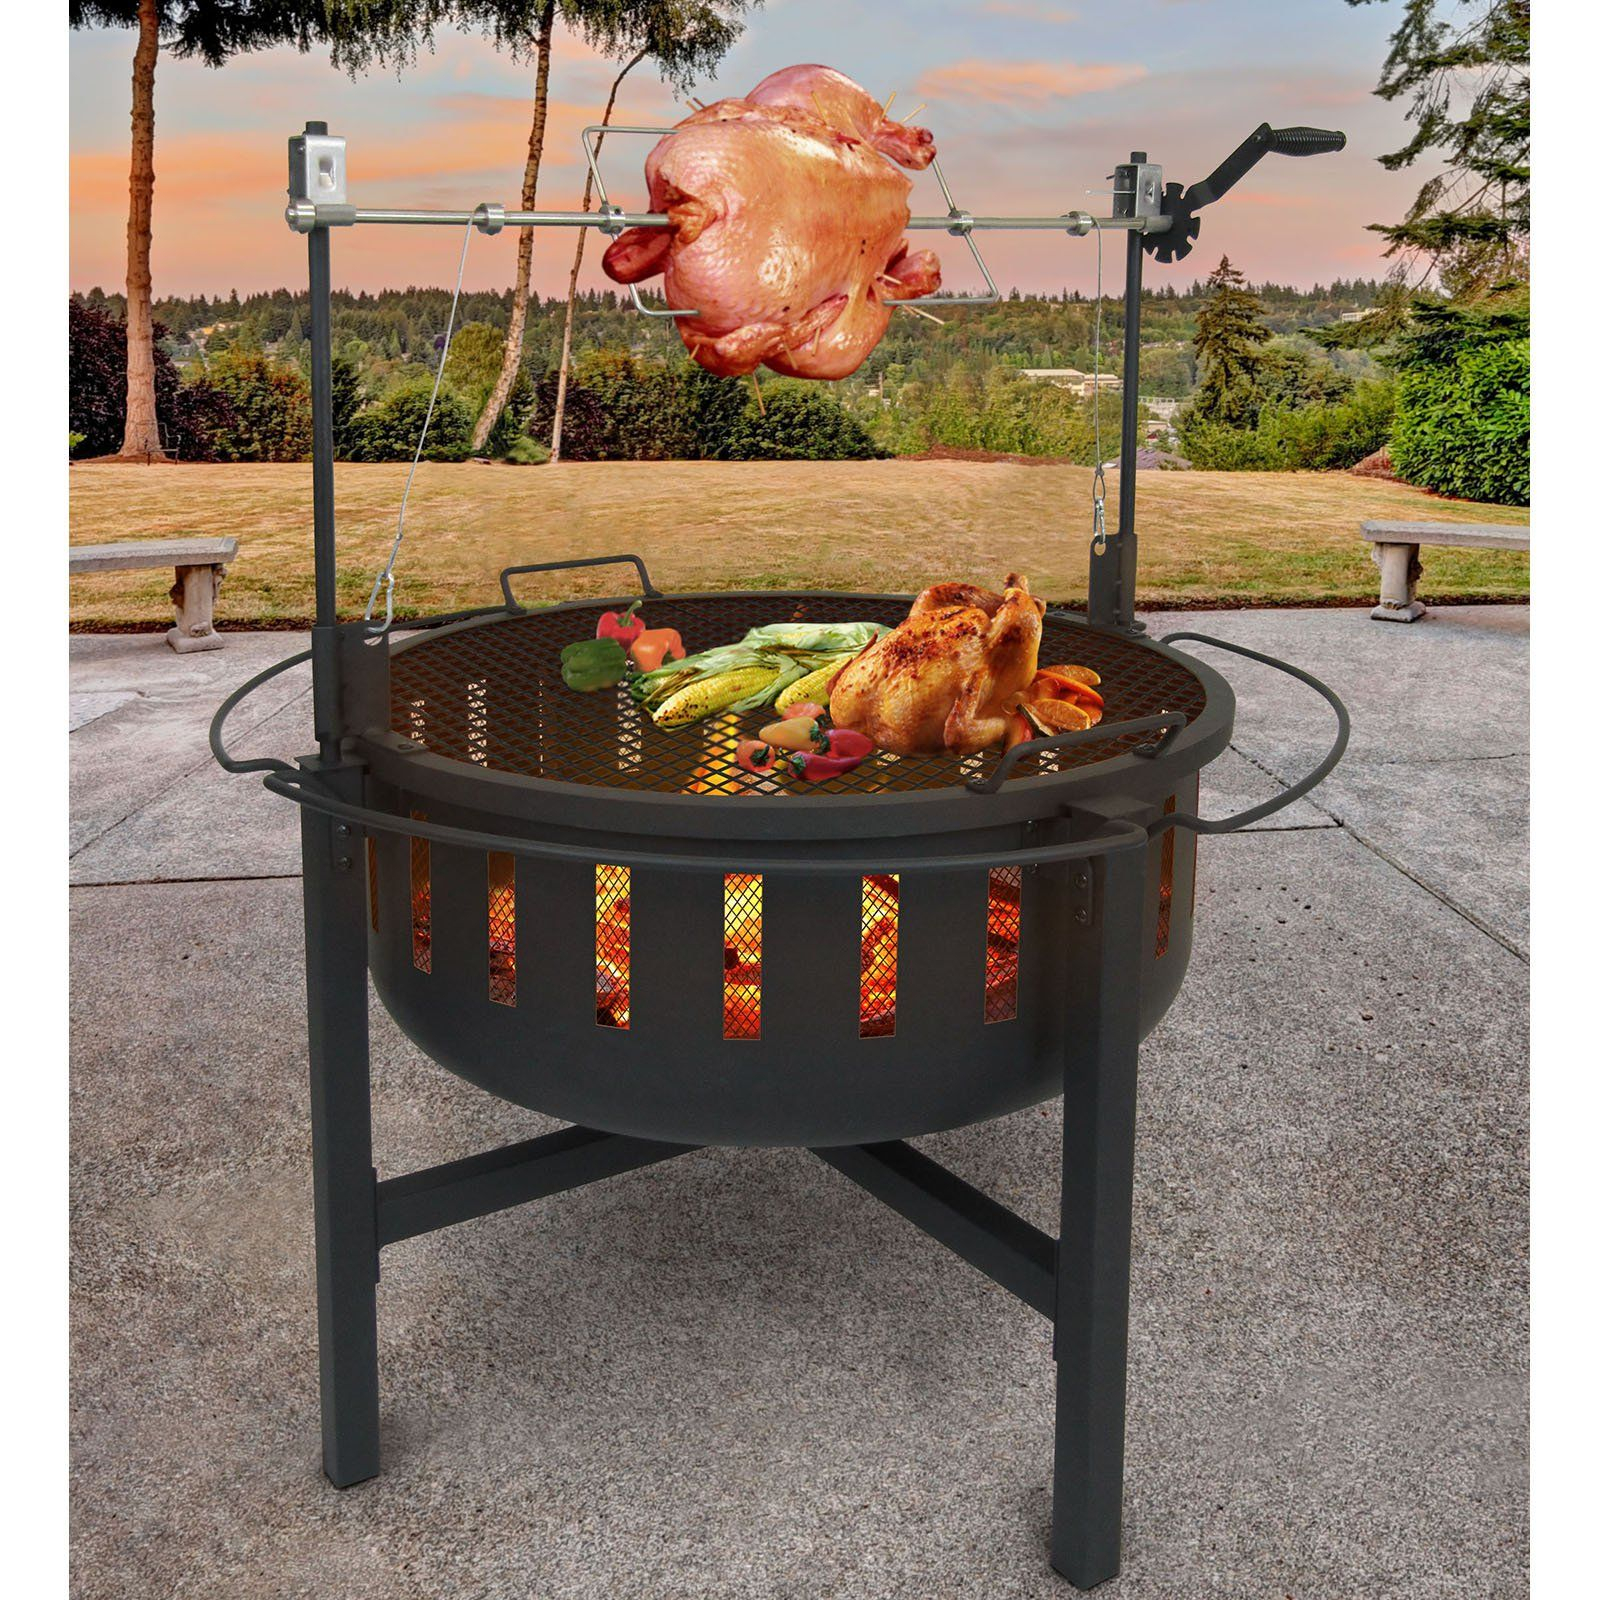 Landmann Fire Rock Fire Pit And Grill With Rotisserie 23960 with regard to dimensions 1600 X 1600